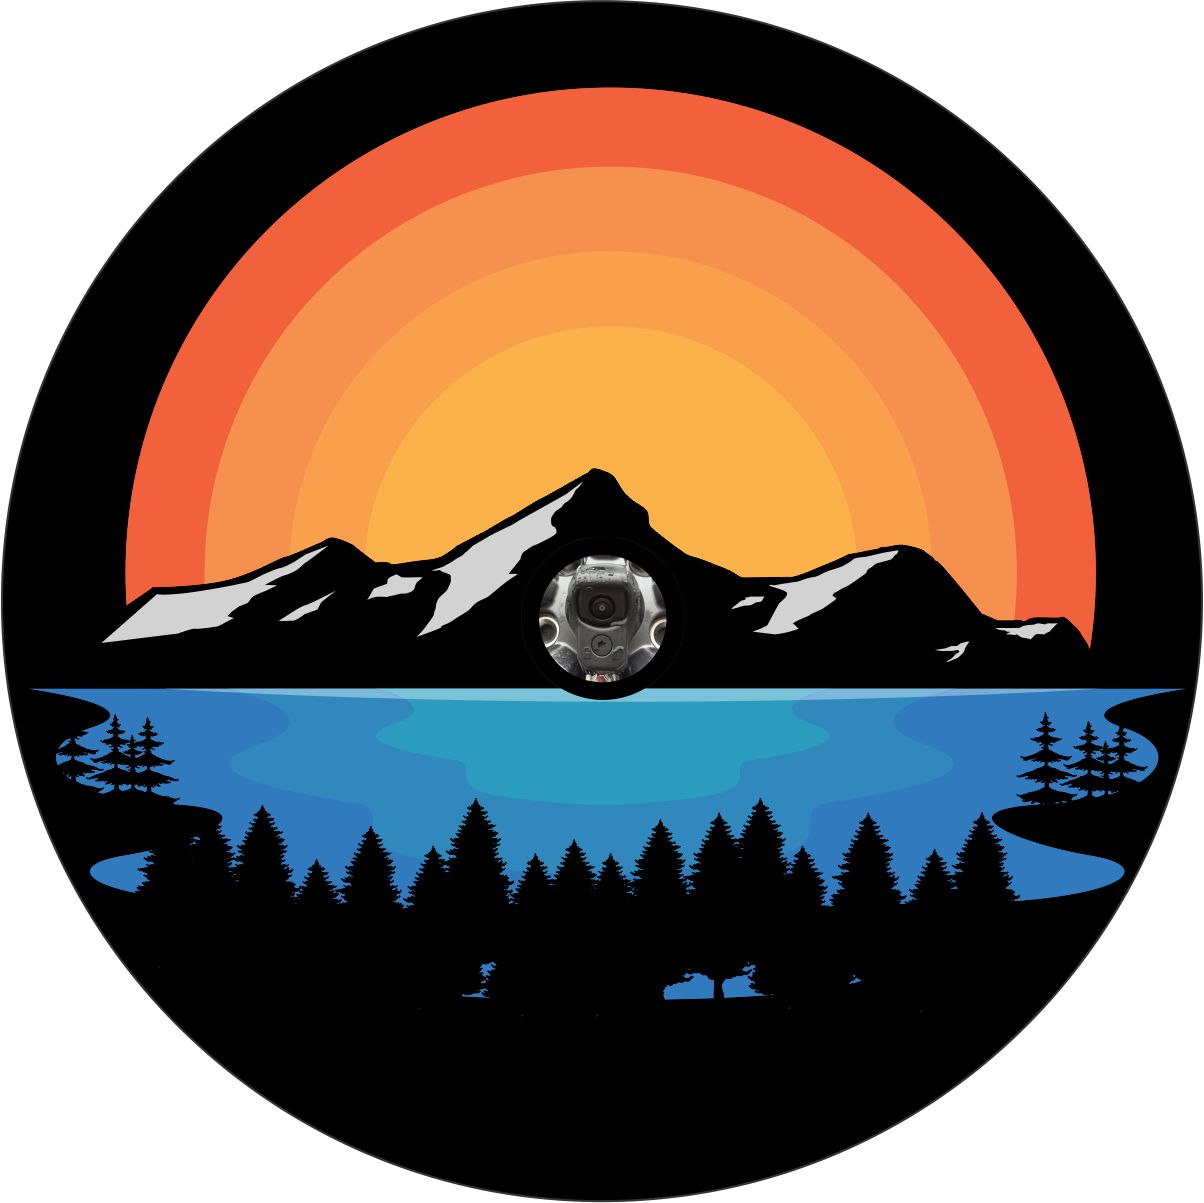 Bright orange colored sun shining behind a landscape design of mountains, lake, and trees spare tire cover design. Accommodates Jeep tire cover camera hole.  